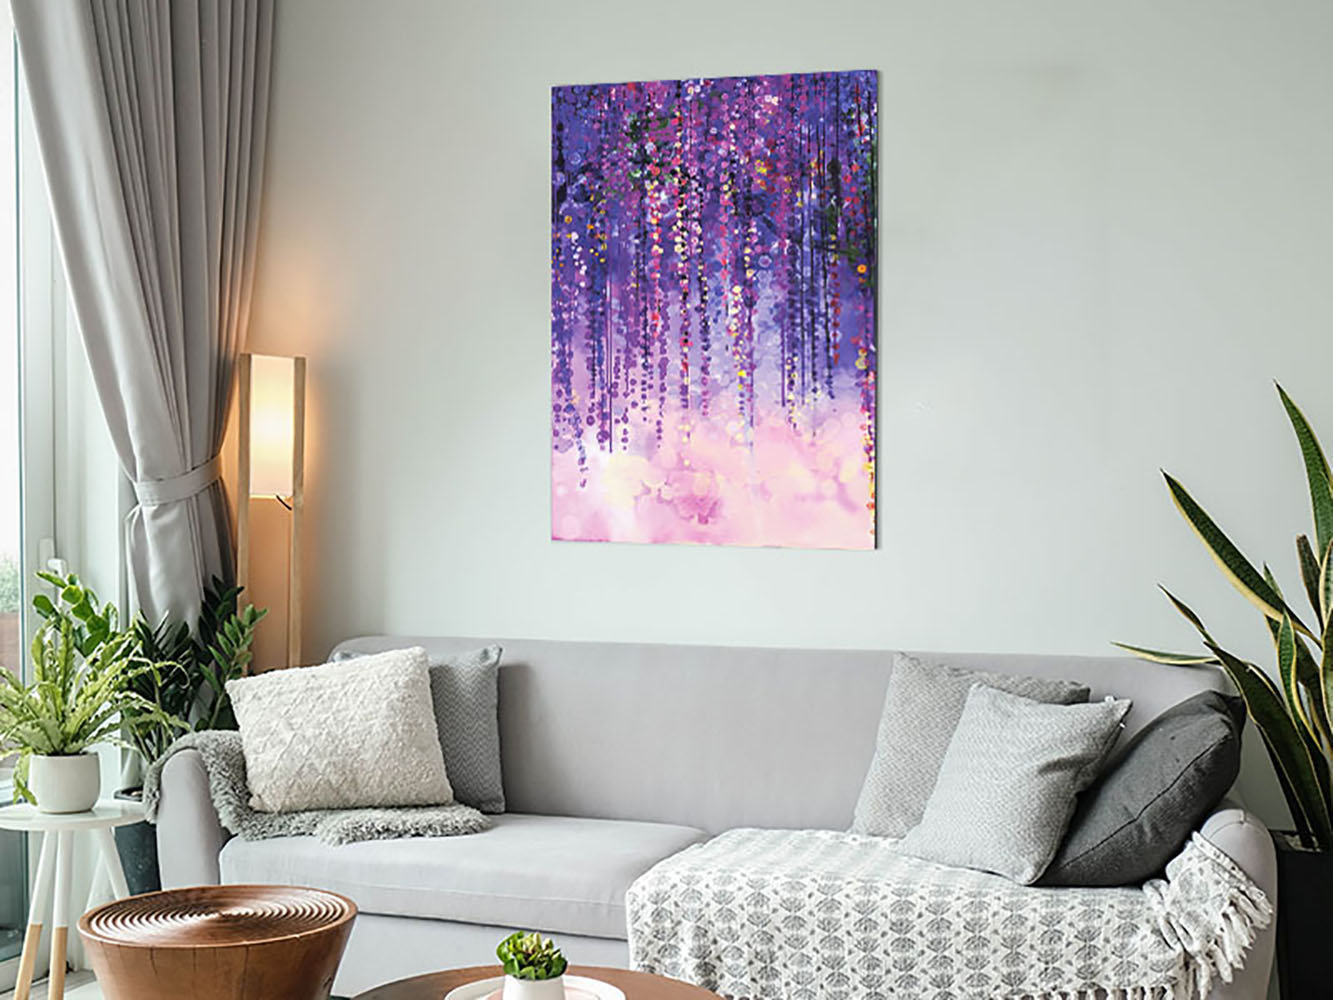 Vibrant Willow Tree - Unframed Graphic Art on Metal